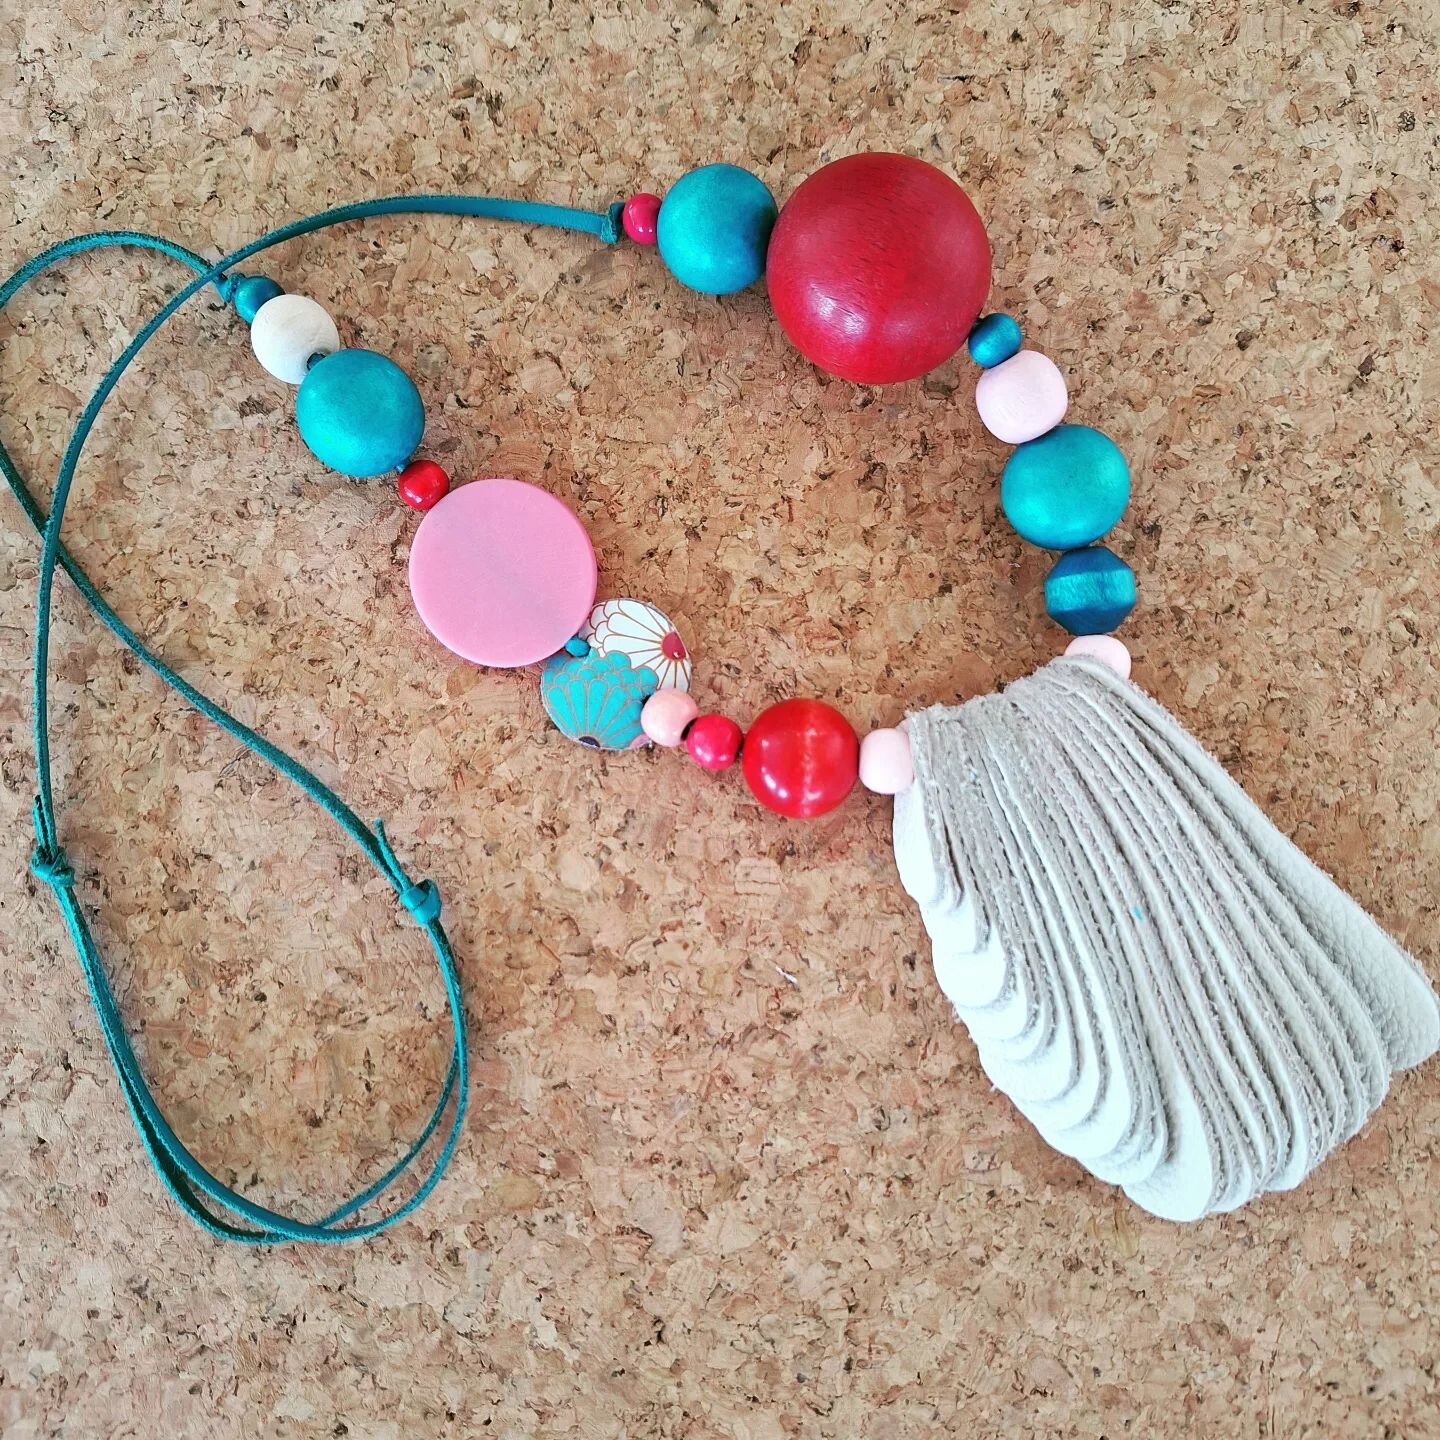 MAINICHI Handmade necklace with recycled and repurposed materials including leather, wood, plastic and Japanese paper.  Available exclusively at Bowerbird Design Market this 3-5 May just in time for Mothers Day shopping.

#handmade #recycled #repurpo